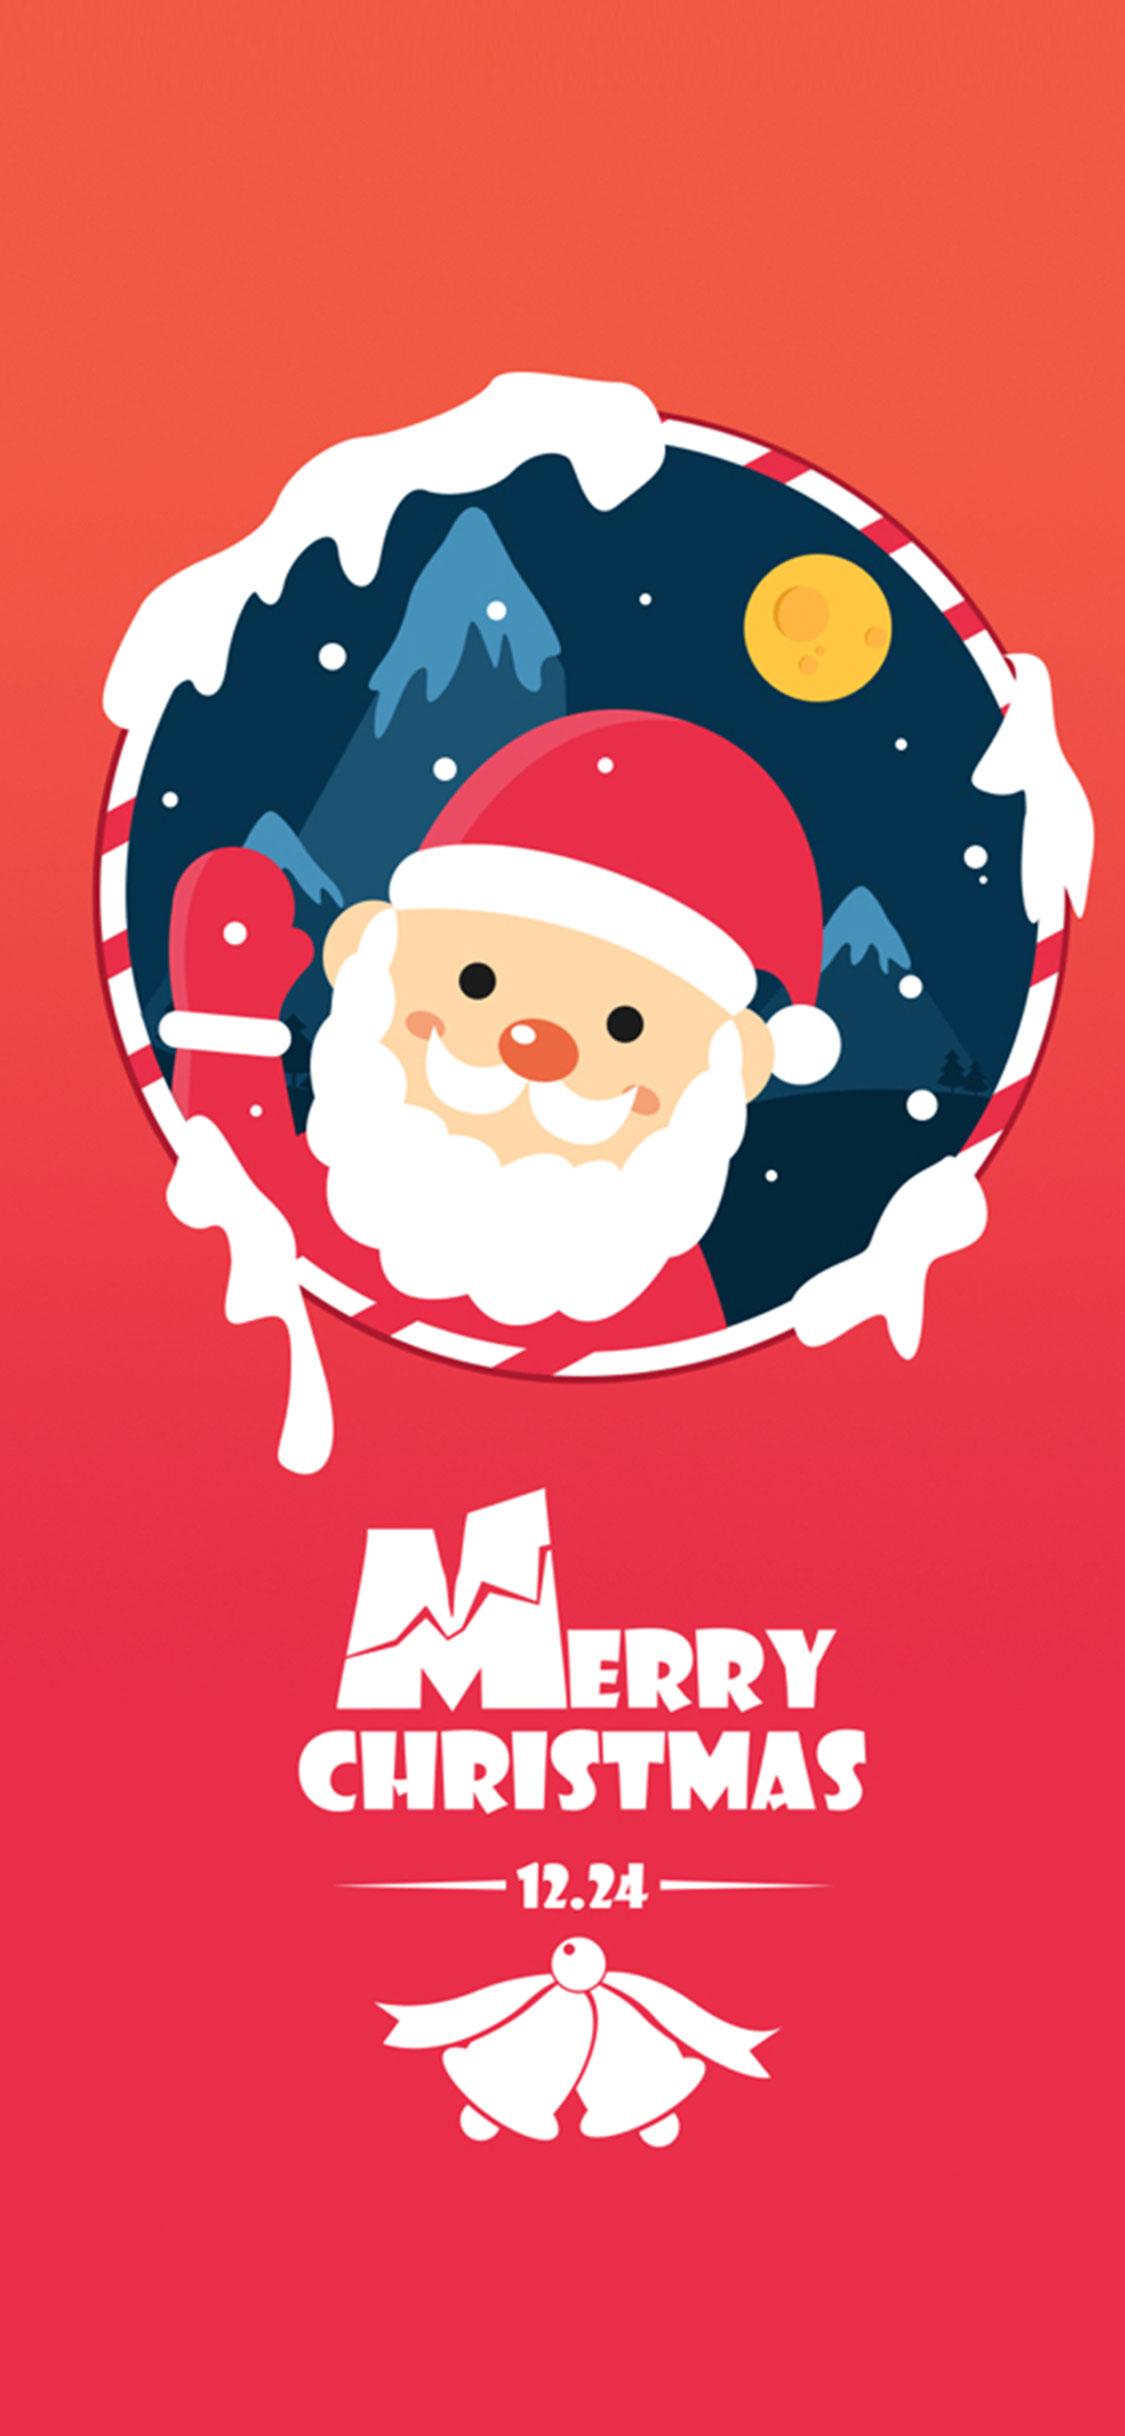 50+ Aesthetic Christmas Wallpaper Backgrounds For iPhone (Free!)